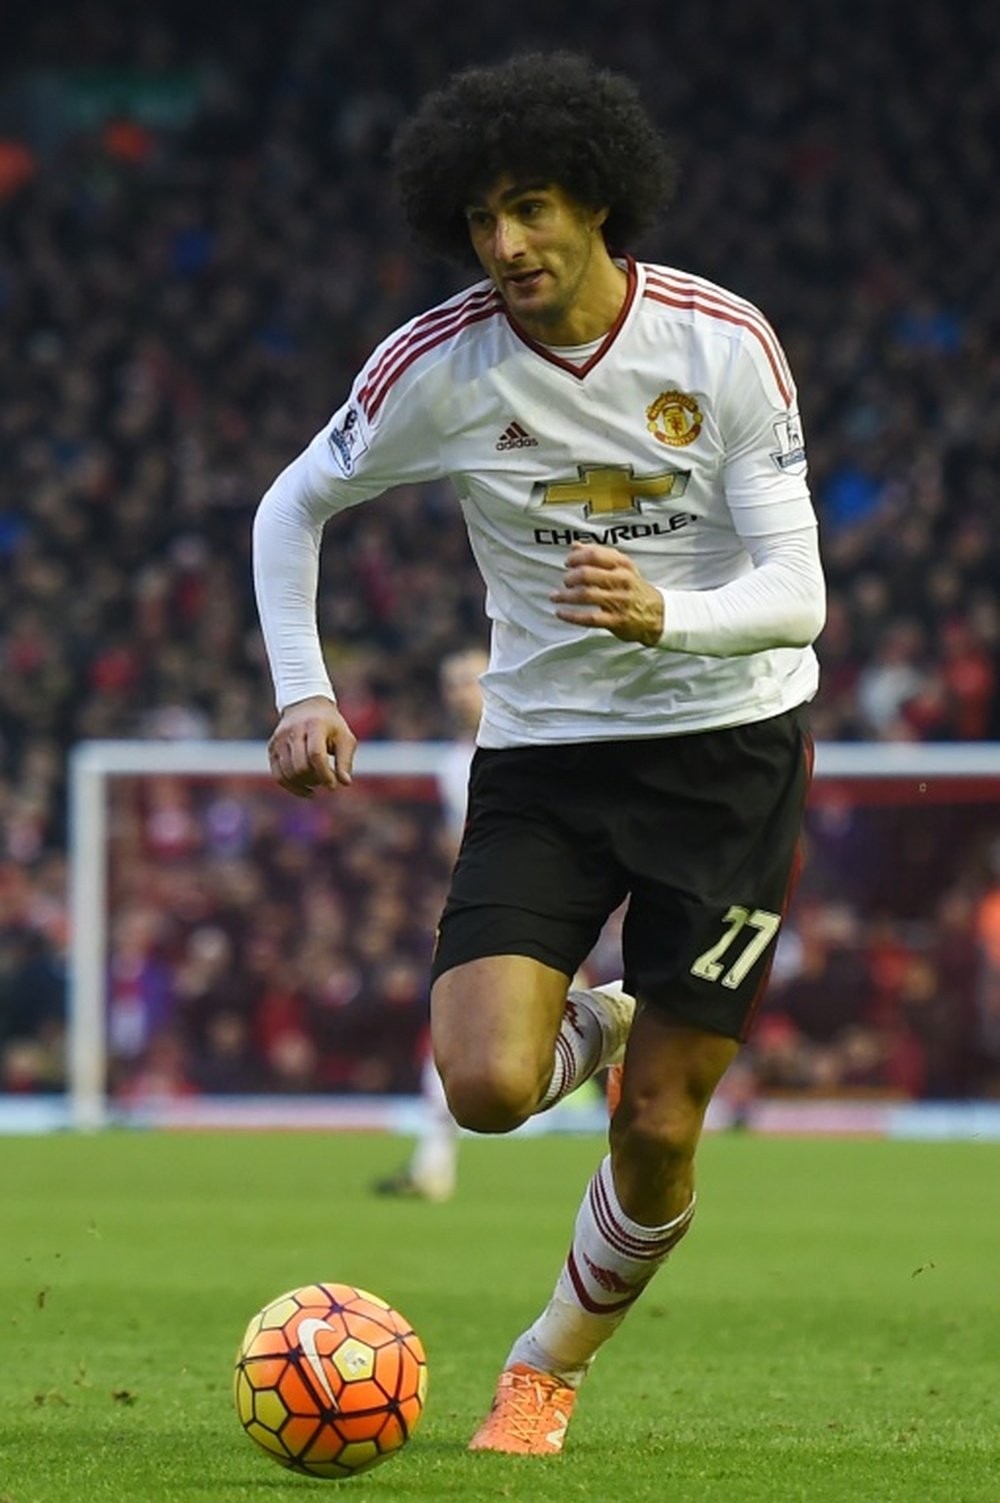 Manchester United's Marouane Fellaini will not be playing on Thursday in Herning. BeSoccer